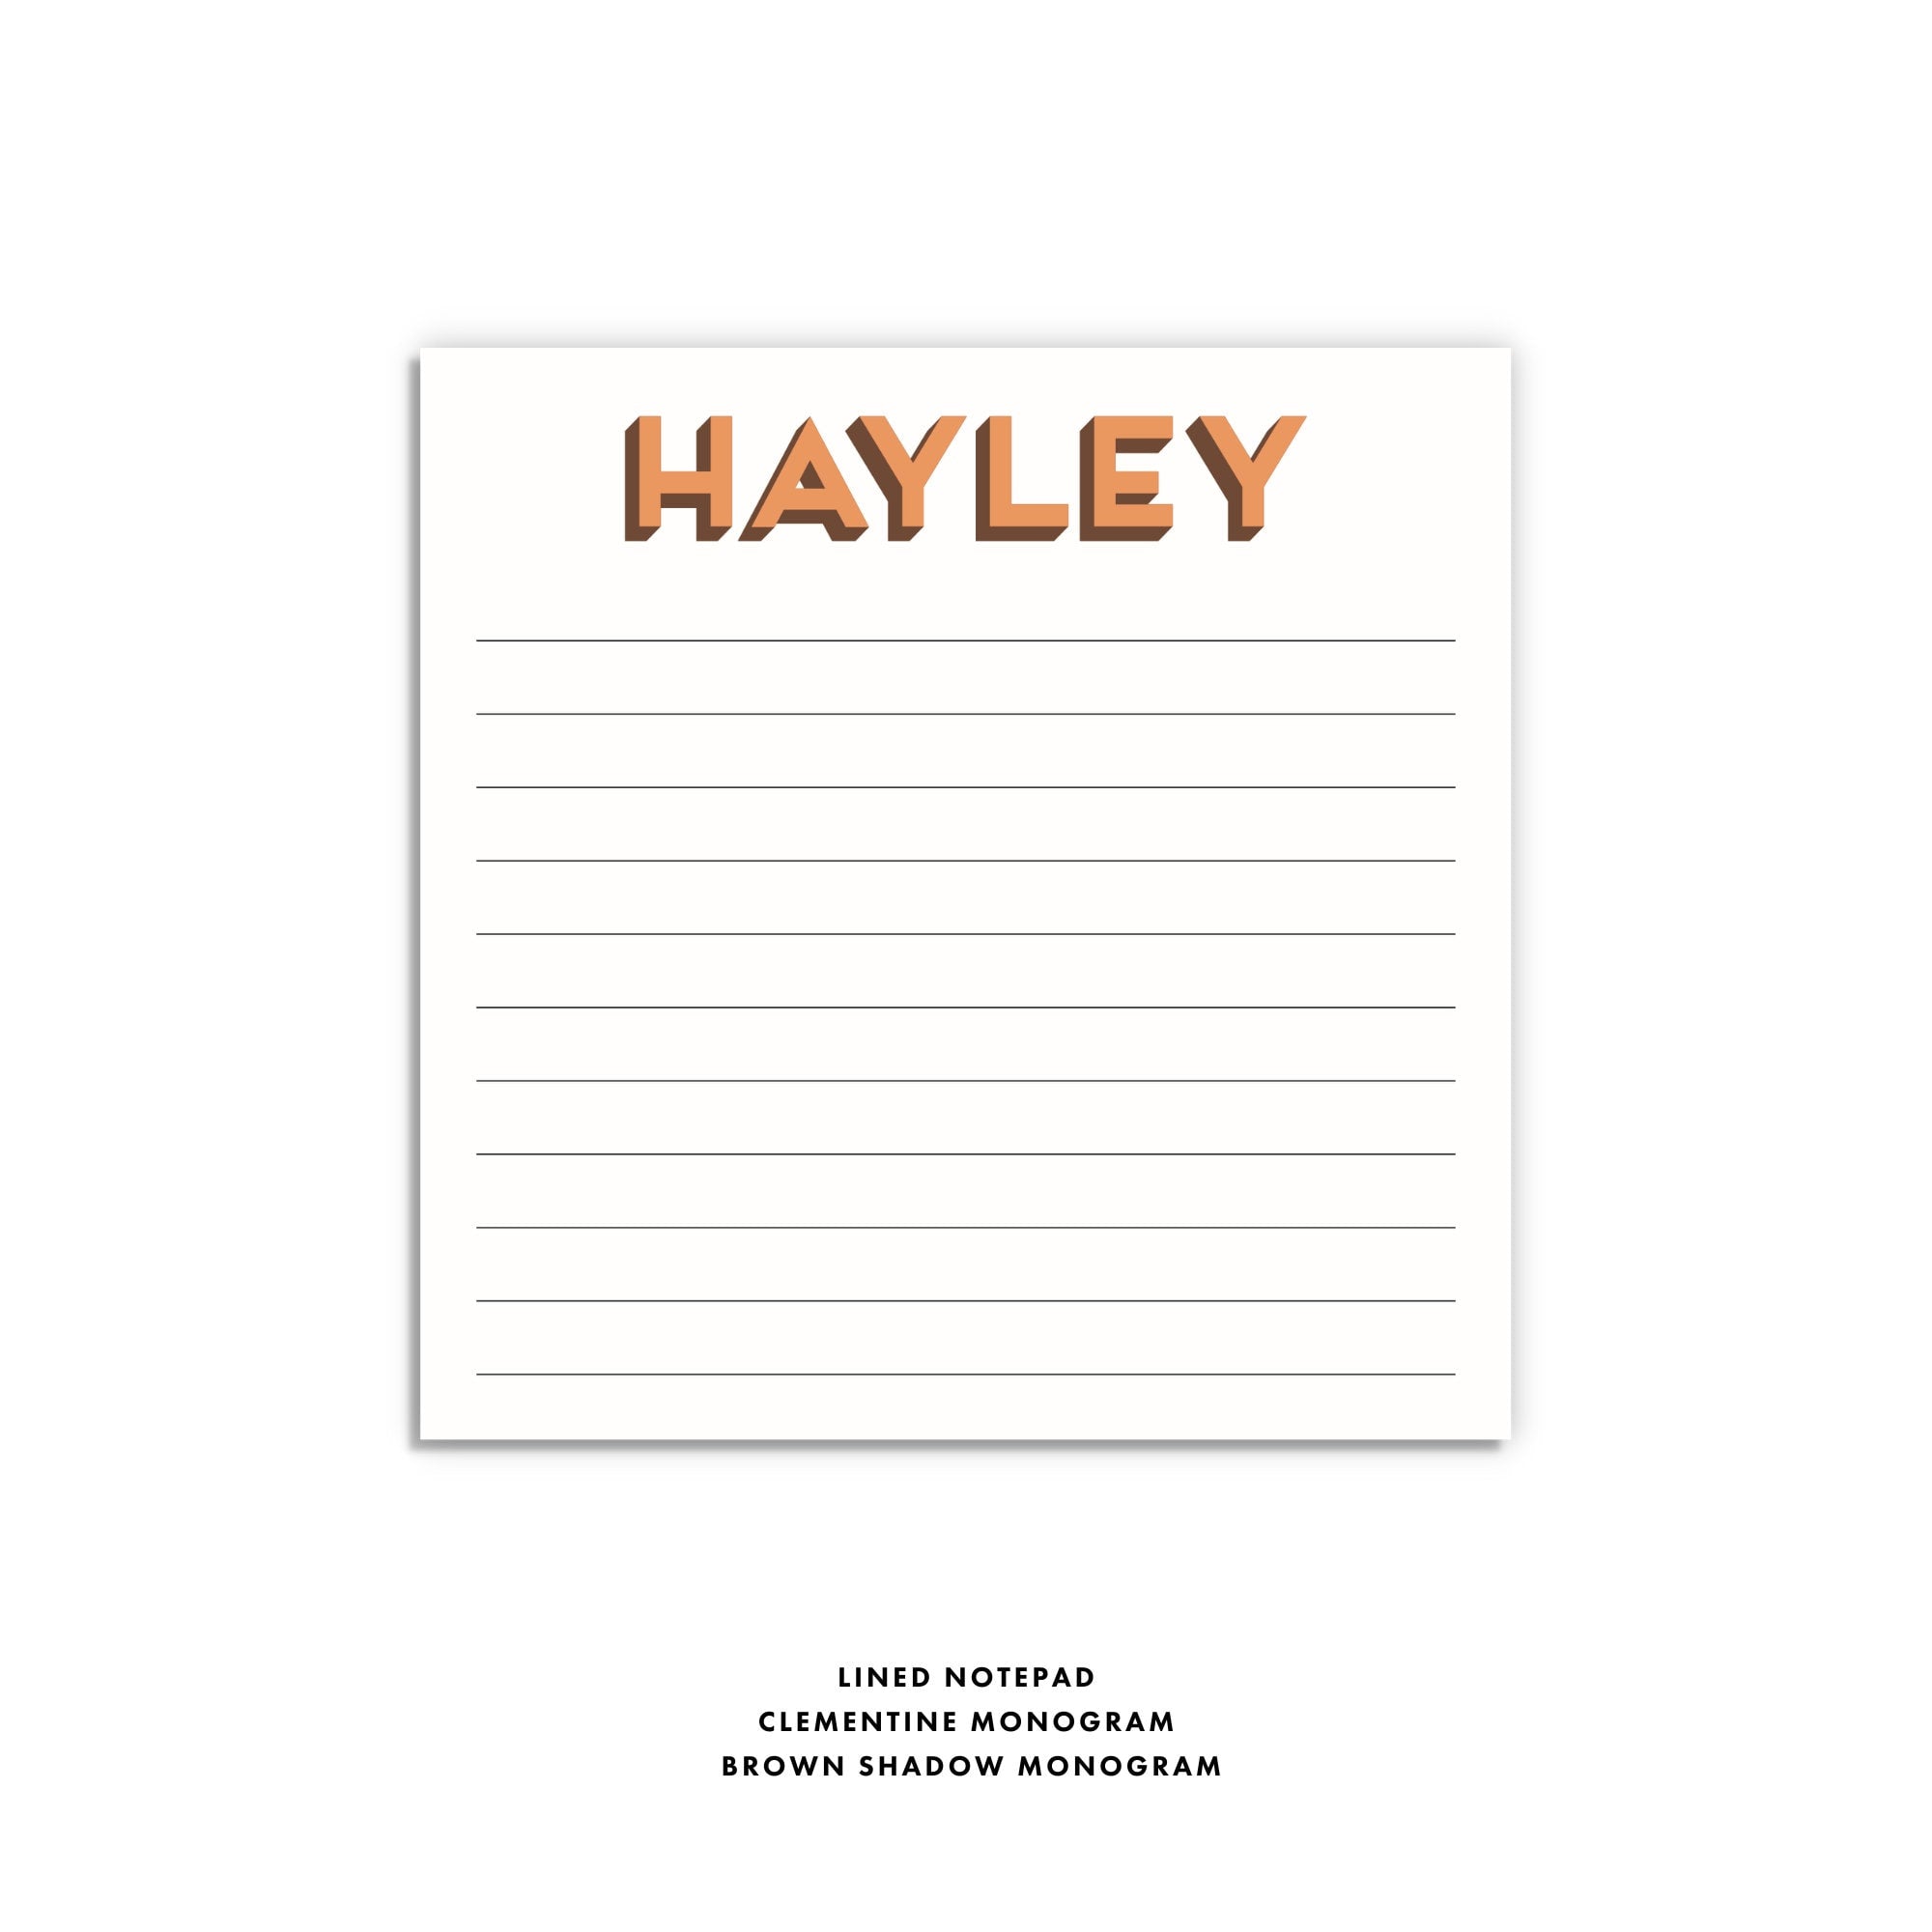 personalized name notepad, lined notepad, monogram stationary / stationary, teacher gift, to do list, grad gift, colorful stationery